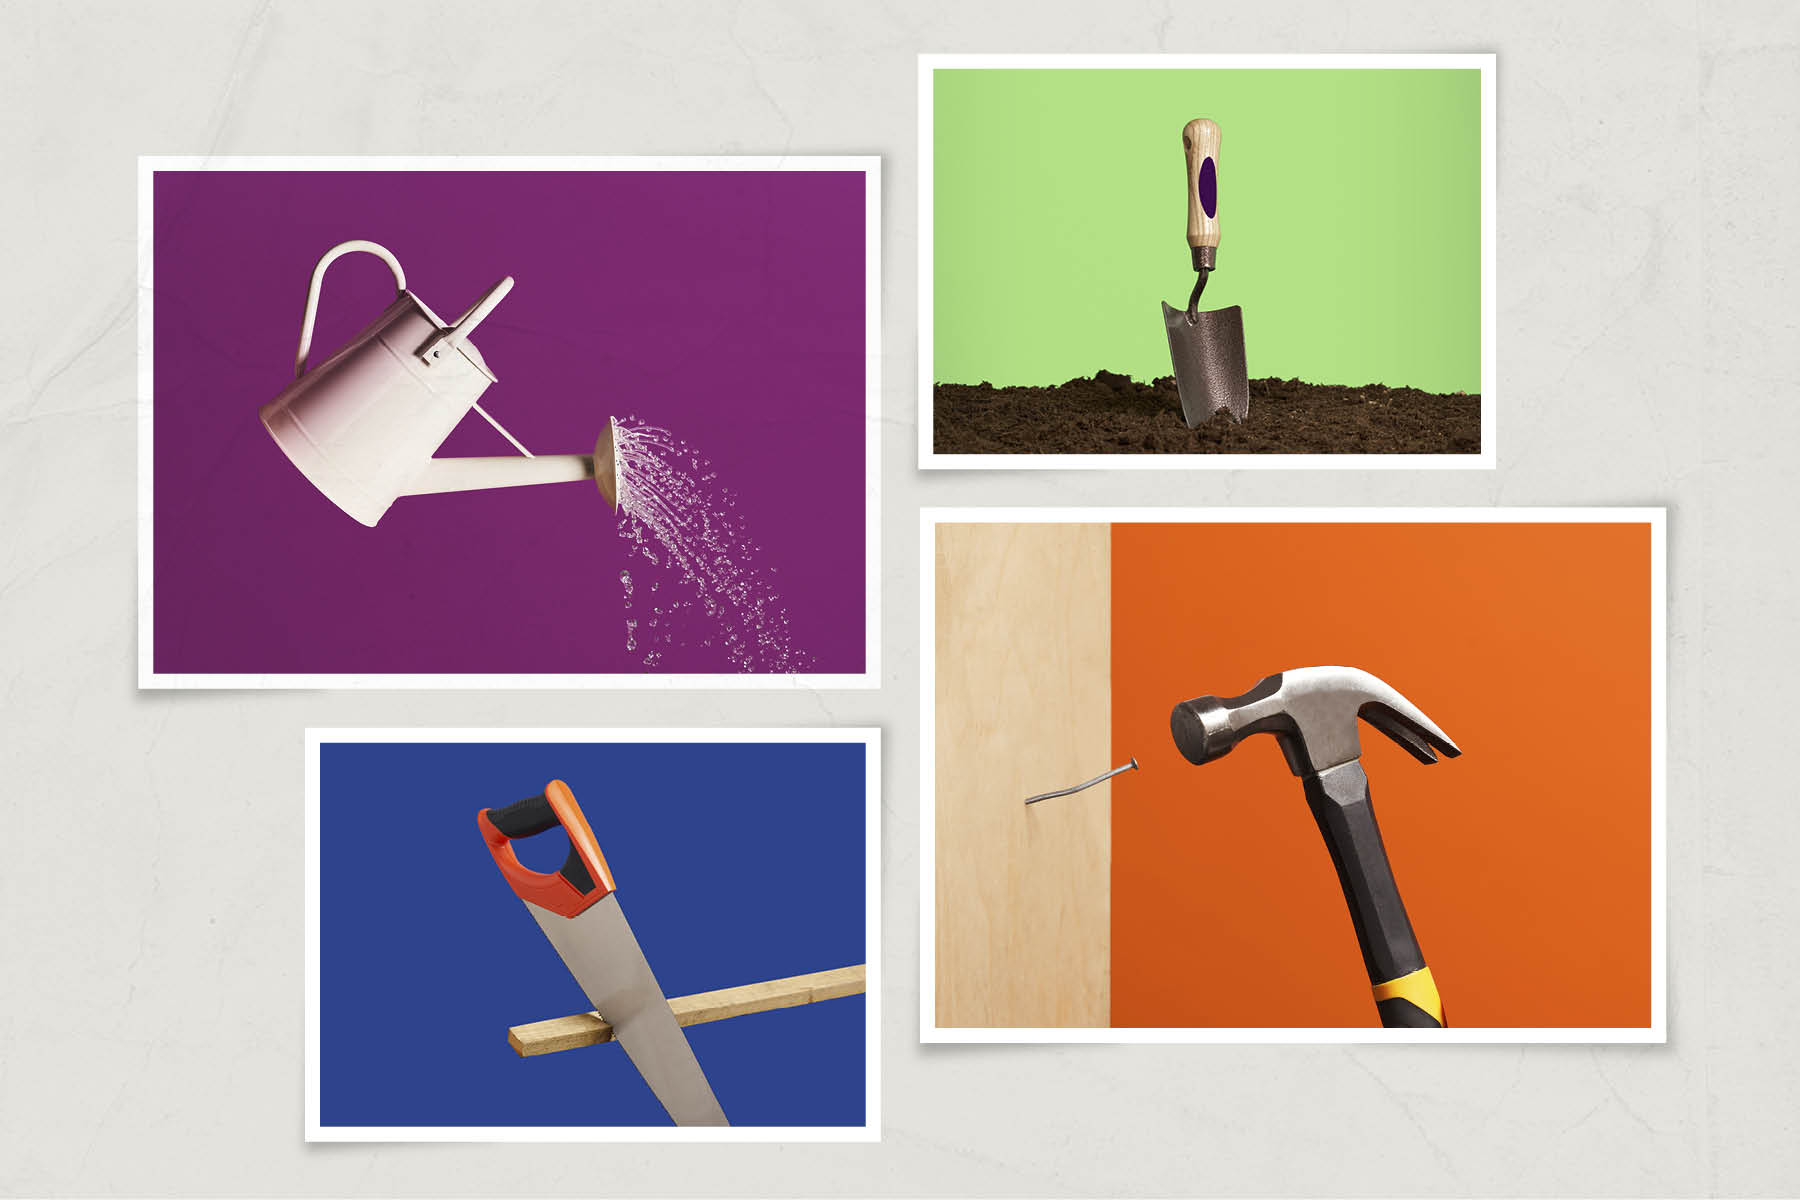 Clockwise from top left: a pale pink watering can spouting water, against a purple background; a trowel sticking out of a mound of soil on a bright green background; a hammer and nail against an orange background; a saw and plank of wood against a dark blue background. 